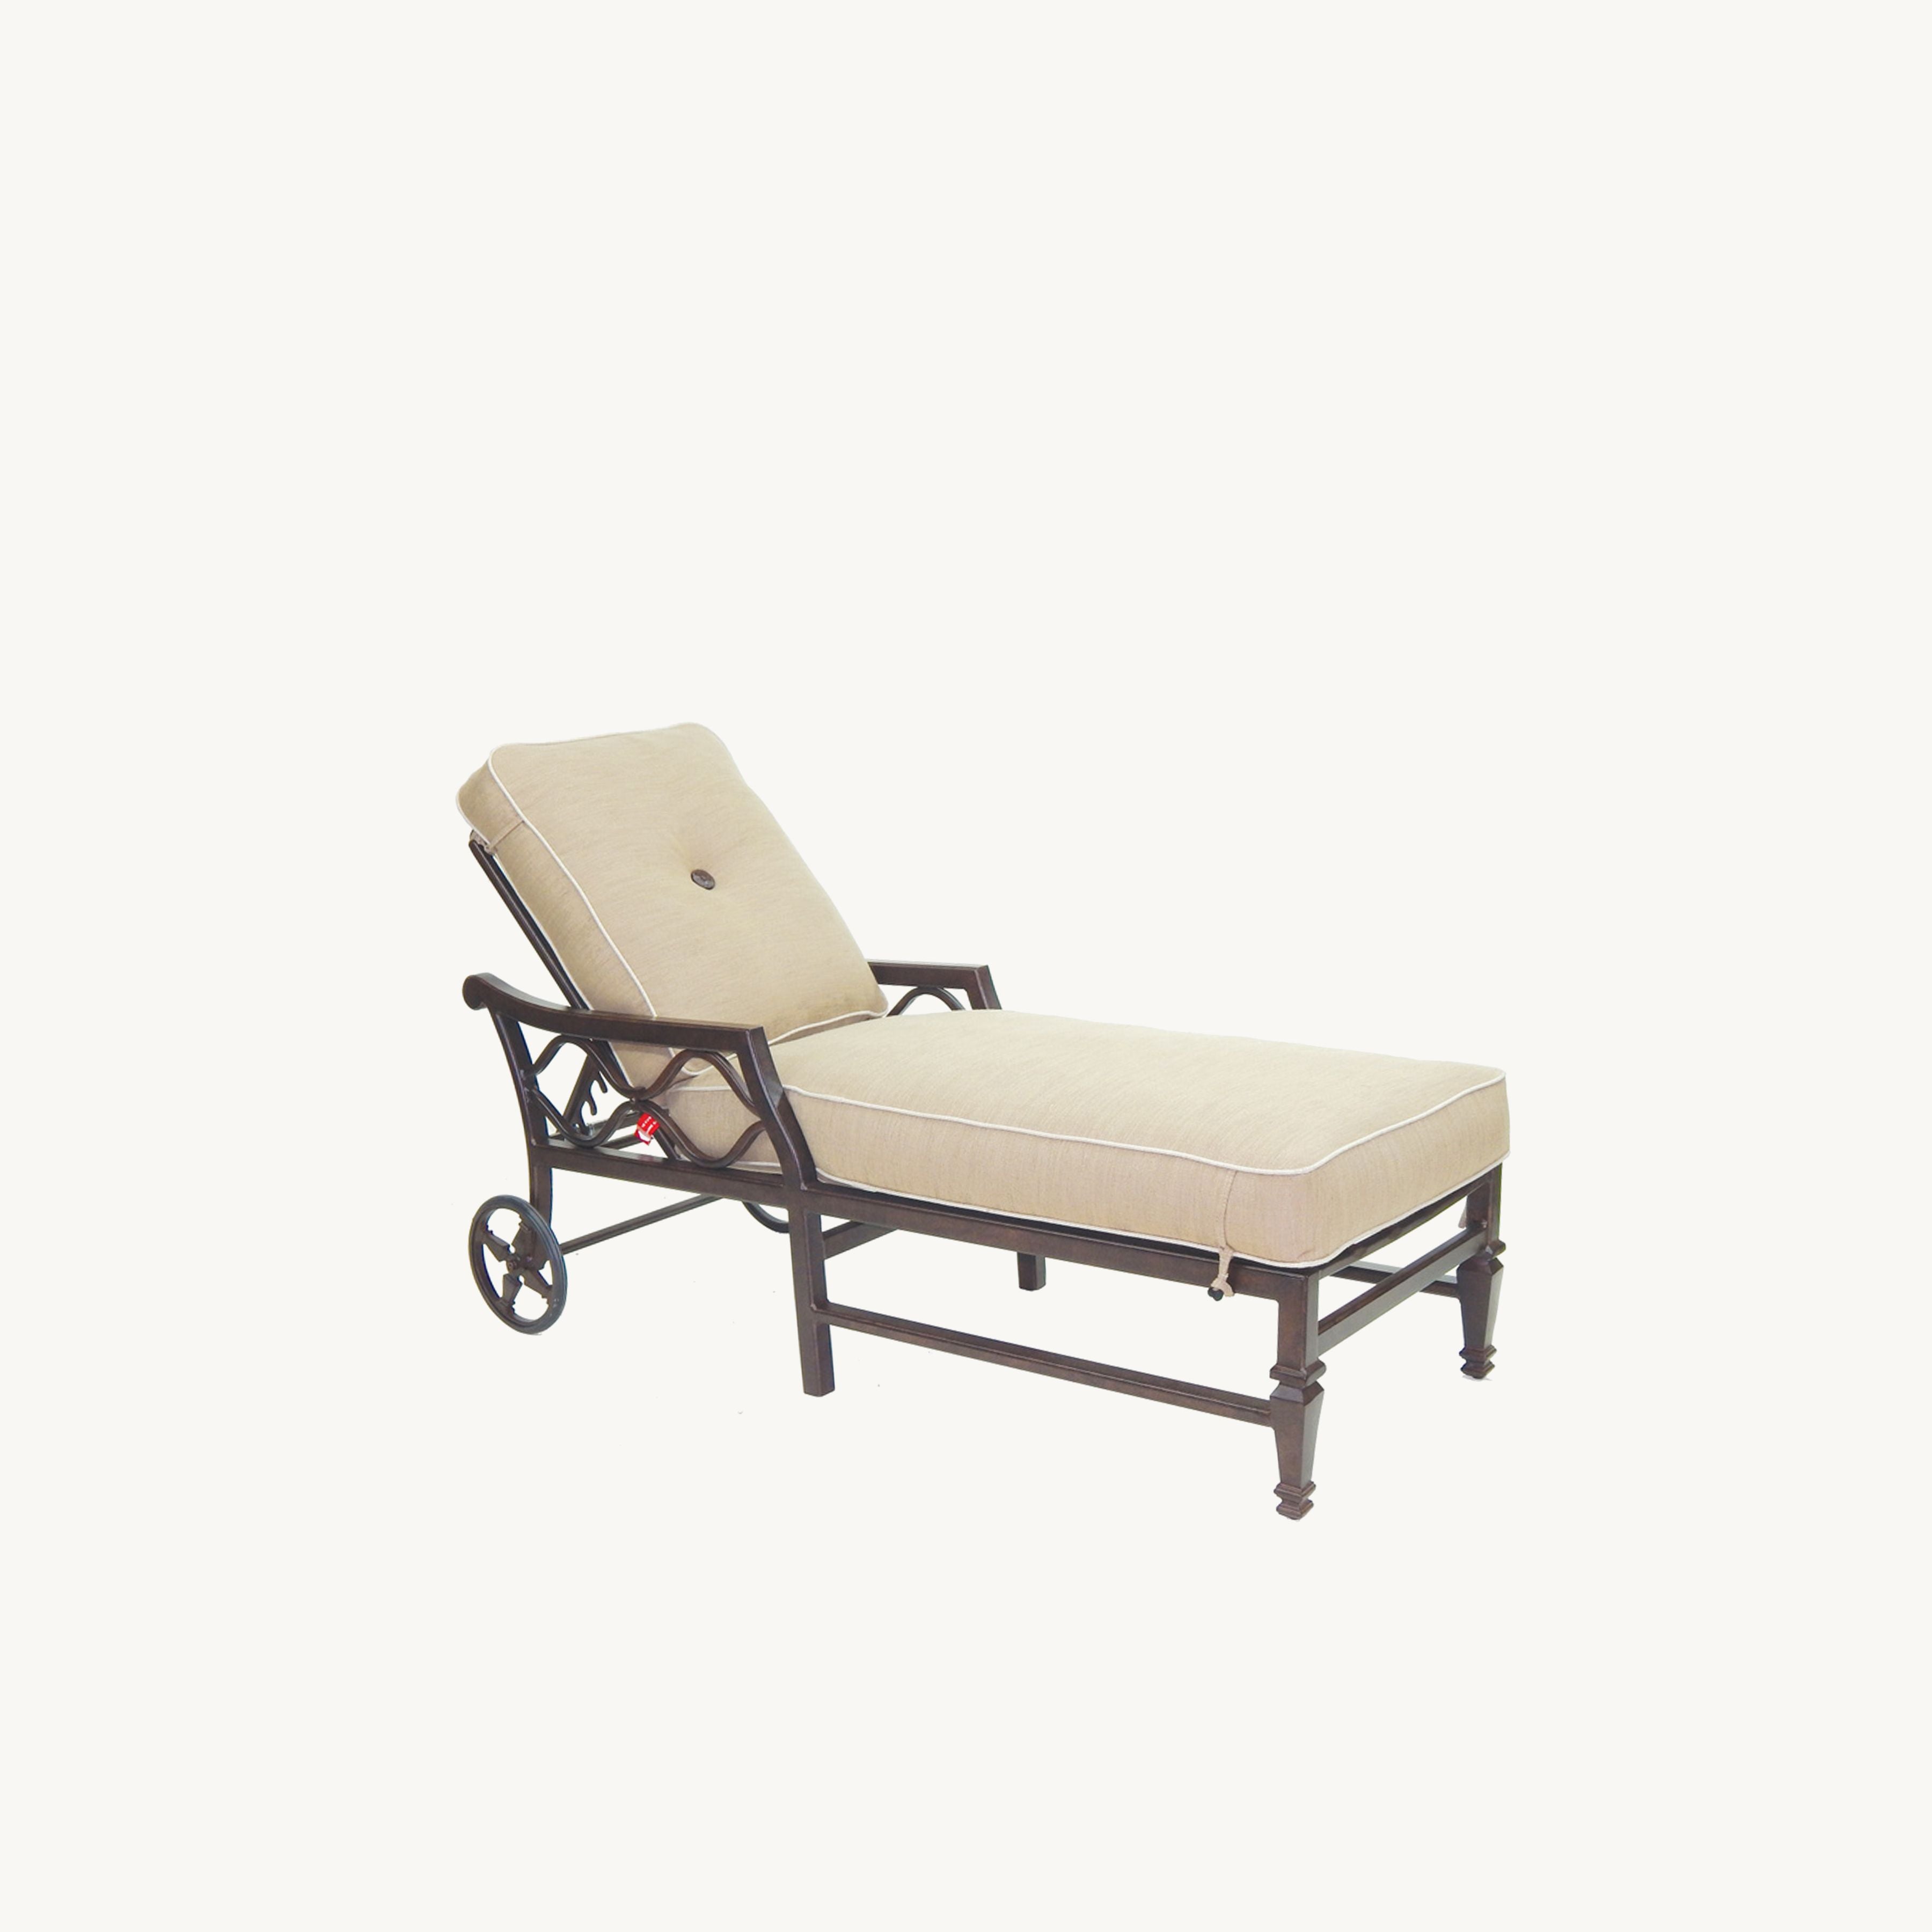 Villa Bianca Adjustable Cushioned Chaise Lounge By Castelle